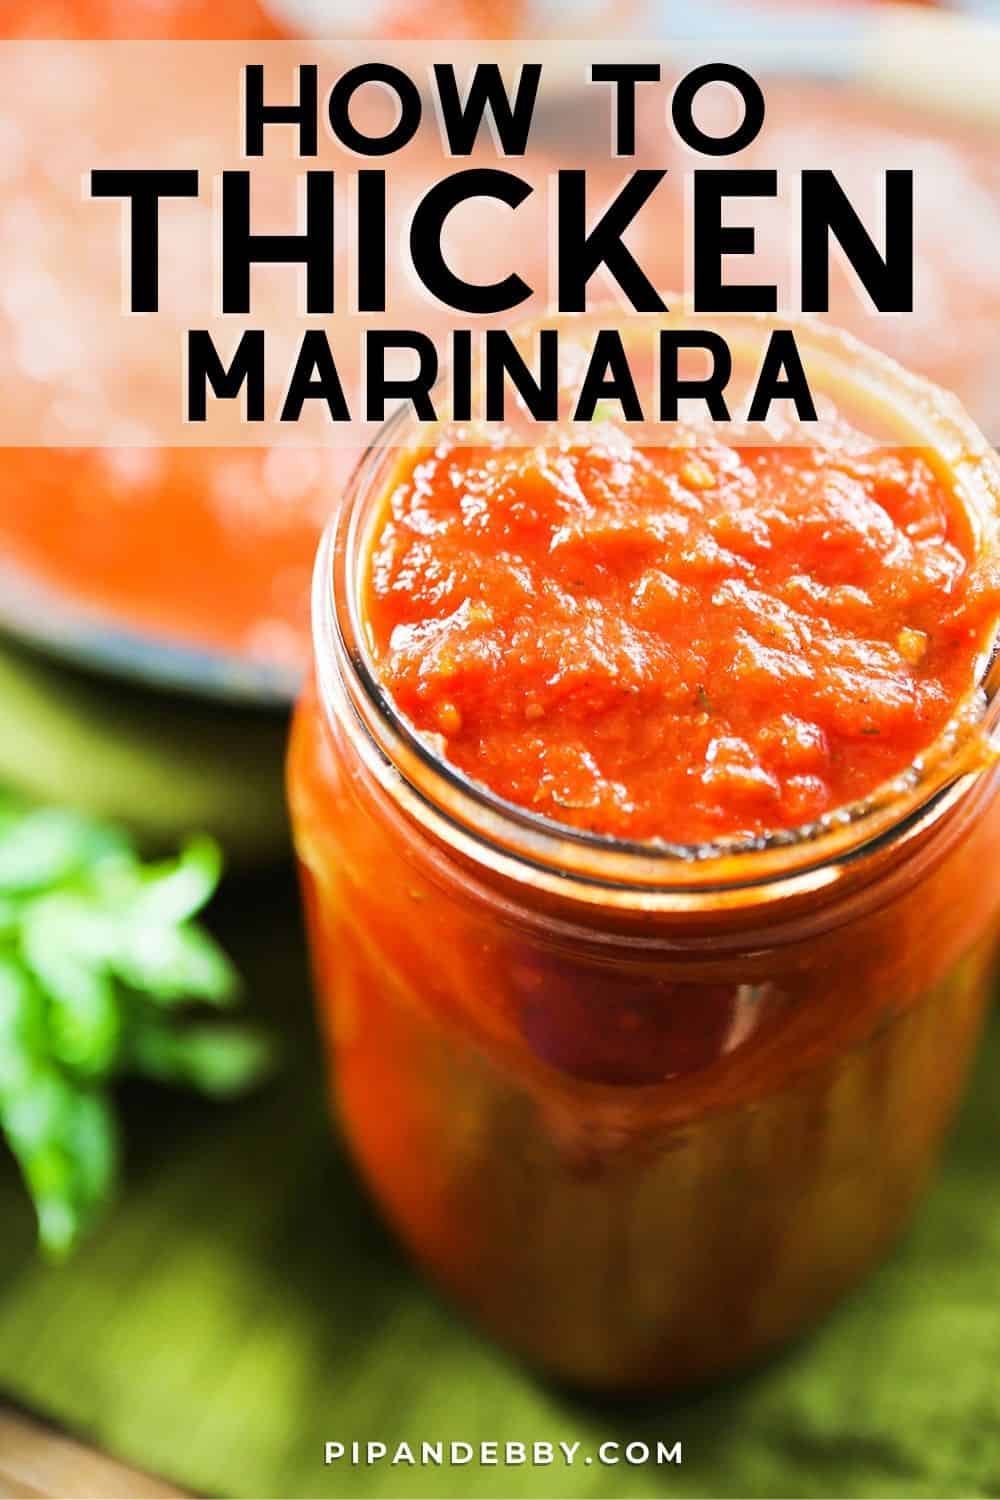 Photo of a jar of red sauce with text overlay reading, "How to thicken marinara."